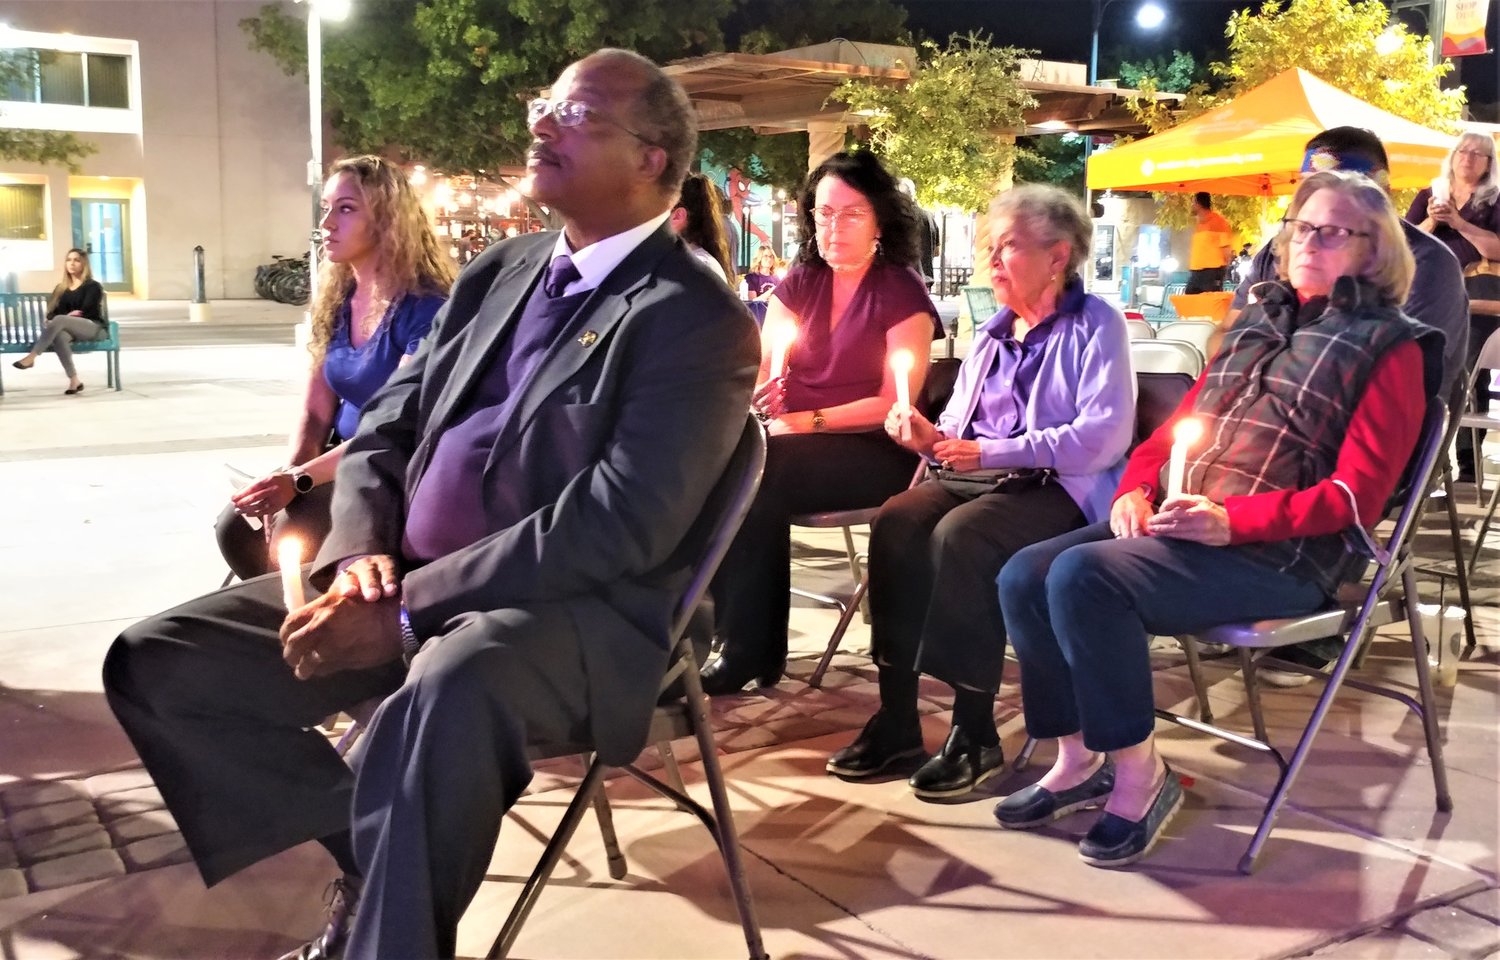 Third Judicial District Attorney Gerald Buyers of Las Cruces holding a candle in honor of victims of domestic violence at La Casa’s 24th annual Candlelight Vigil, held Oct. 21 at Plaza de Las Cruces.